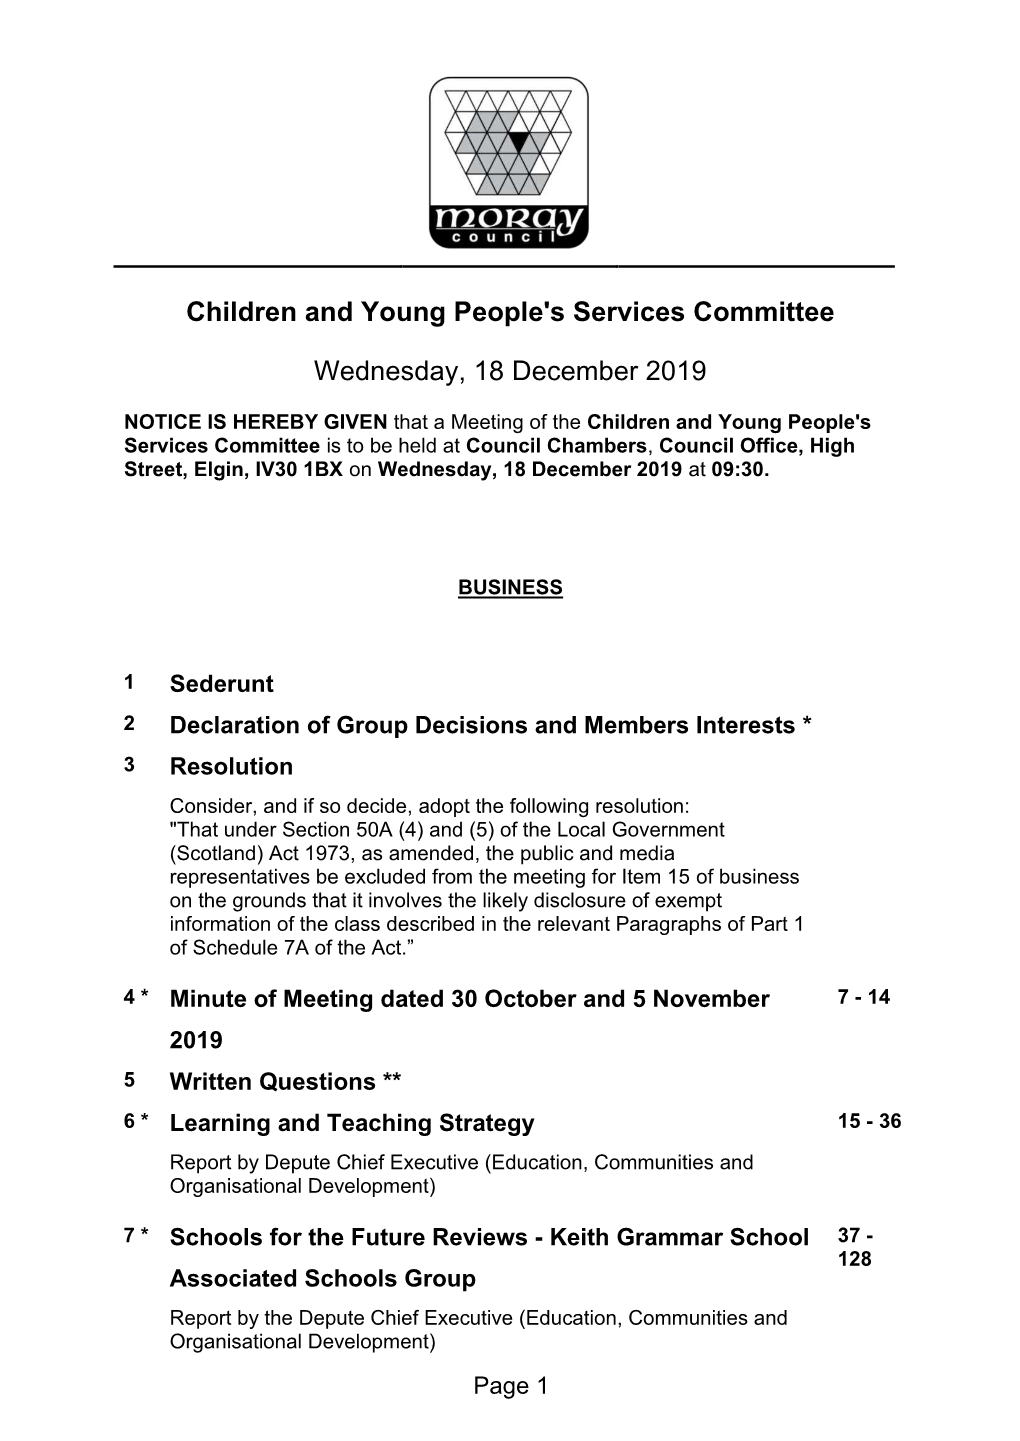 Children and Young People's Services Committee Wednesday